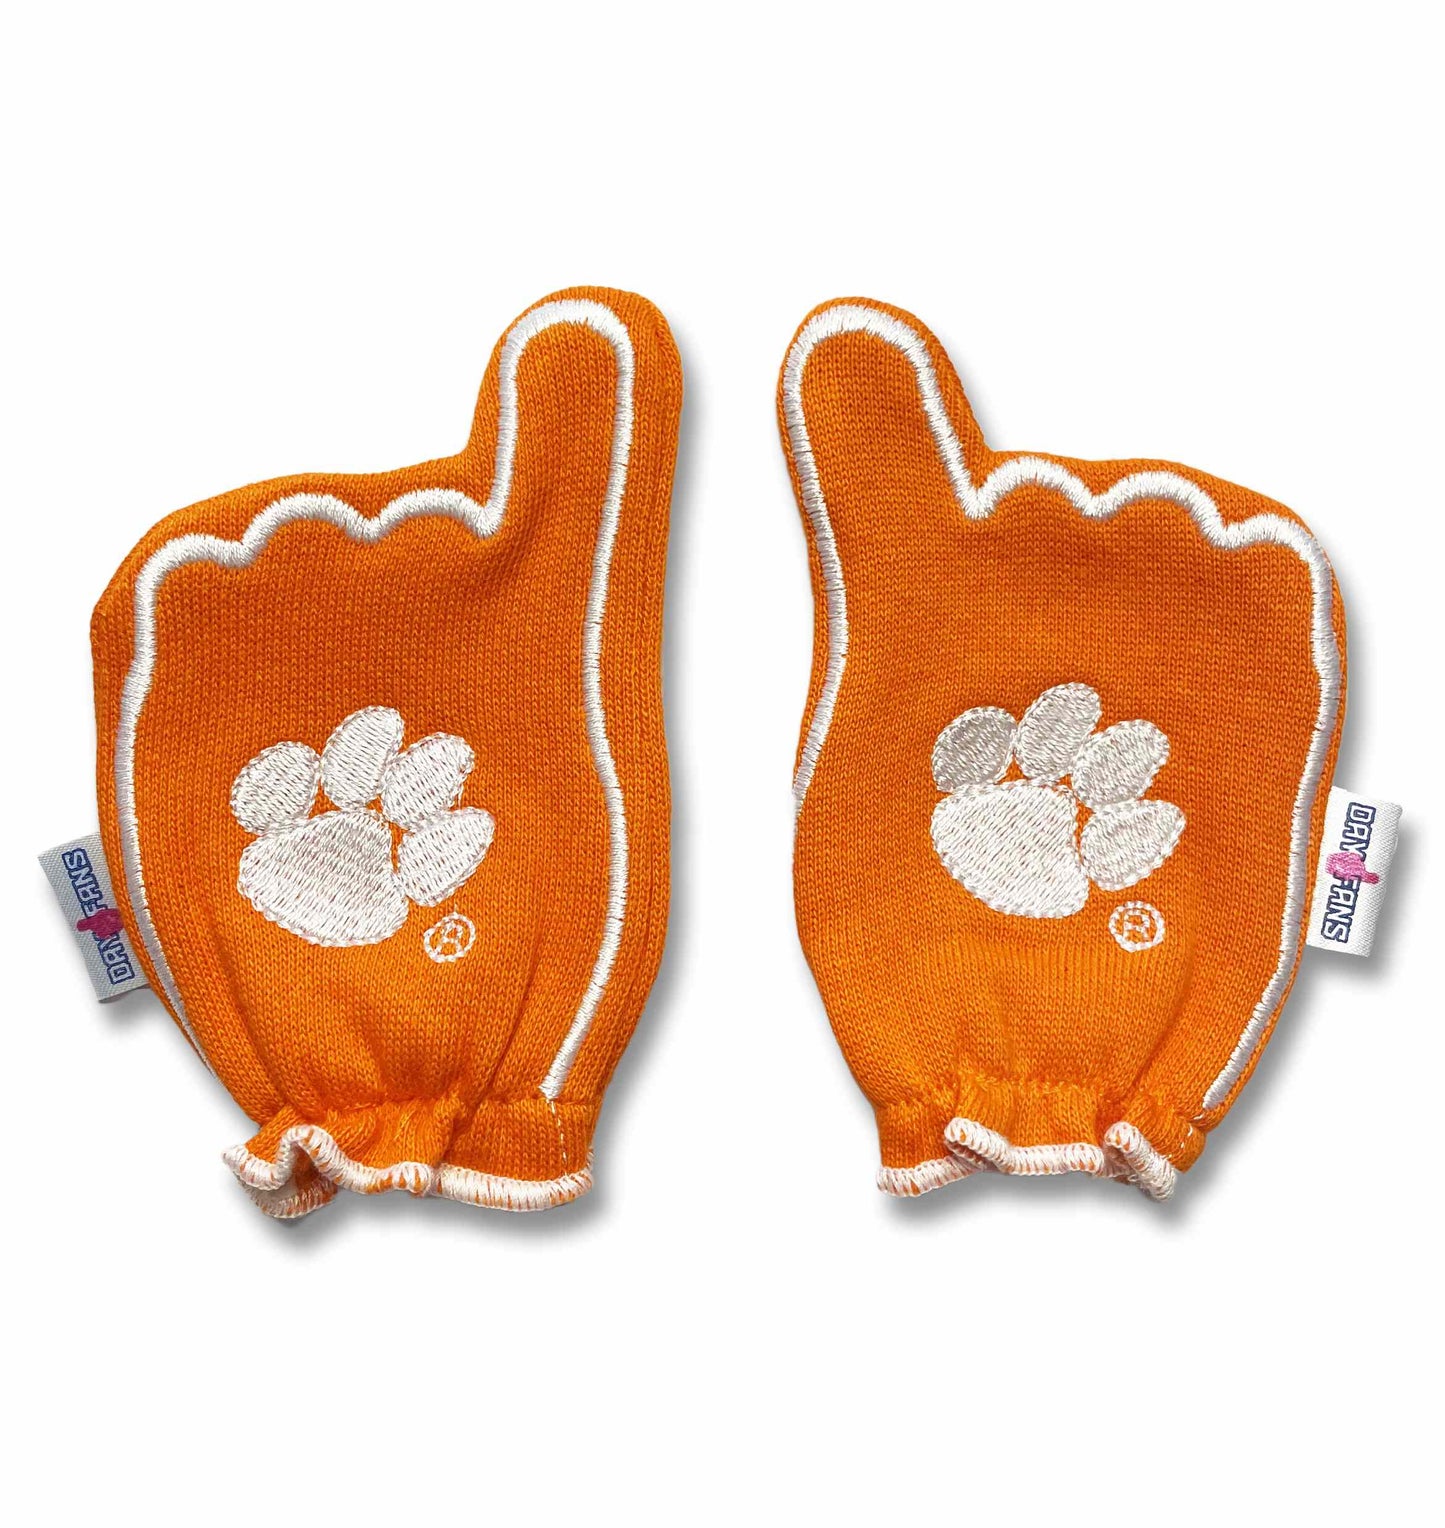 Clemson Go Tigers FanMitts Baby Mittens Orange Back Pair